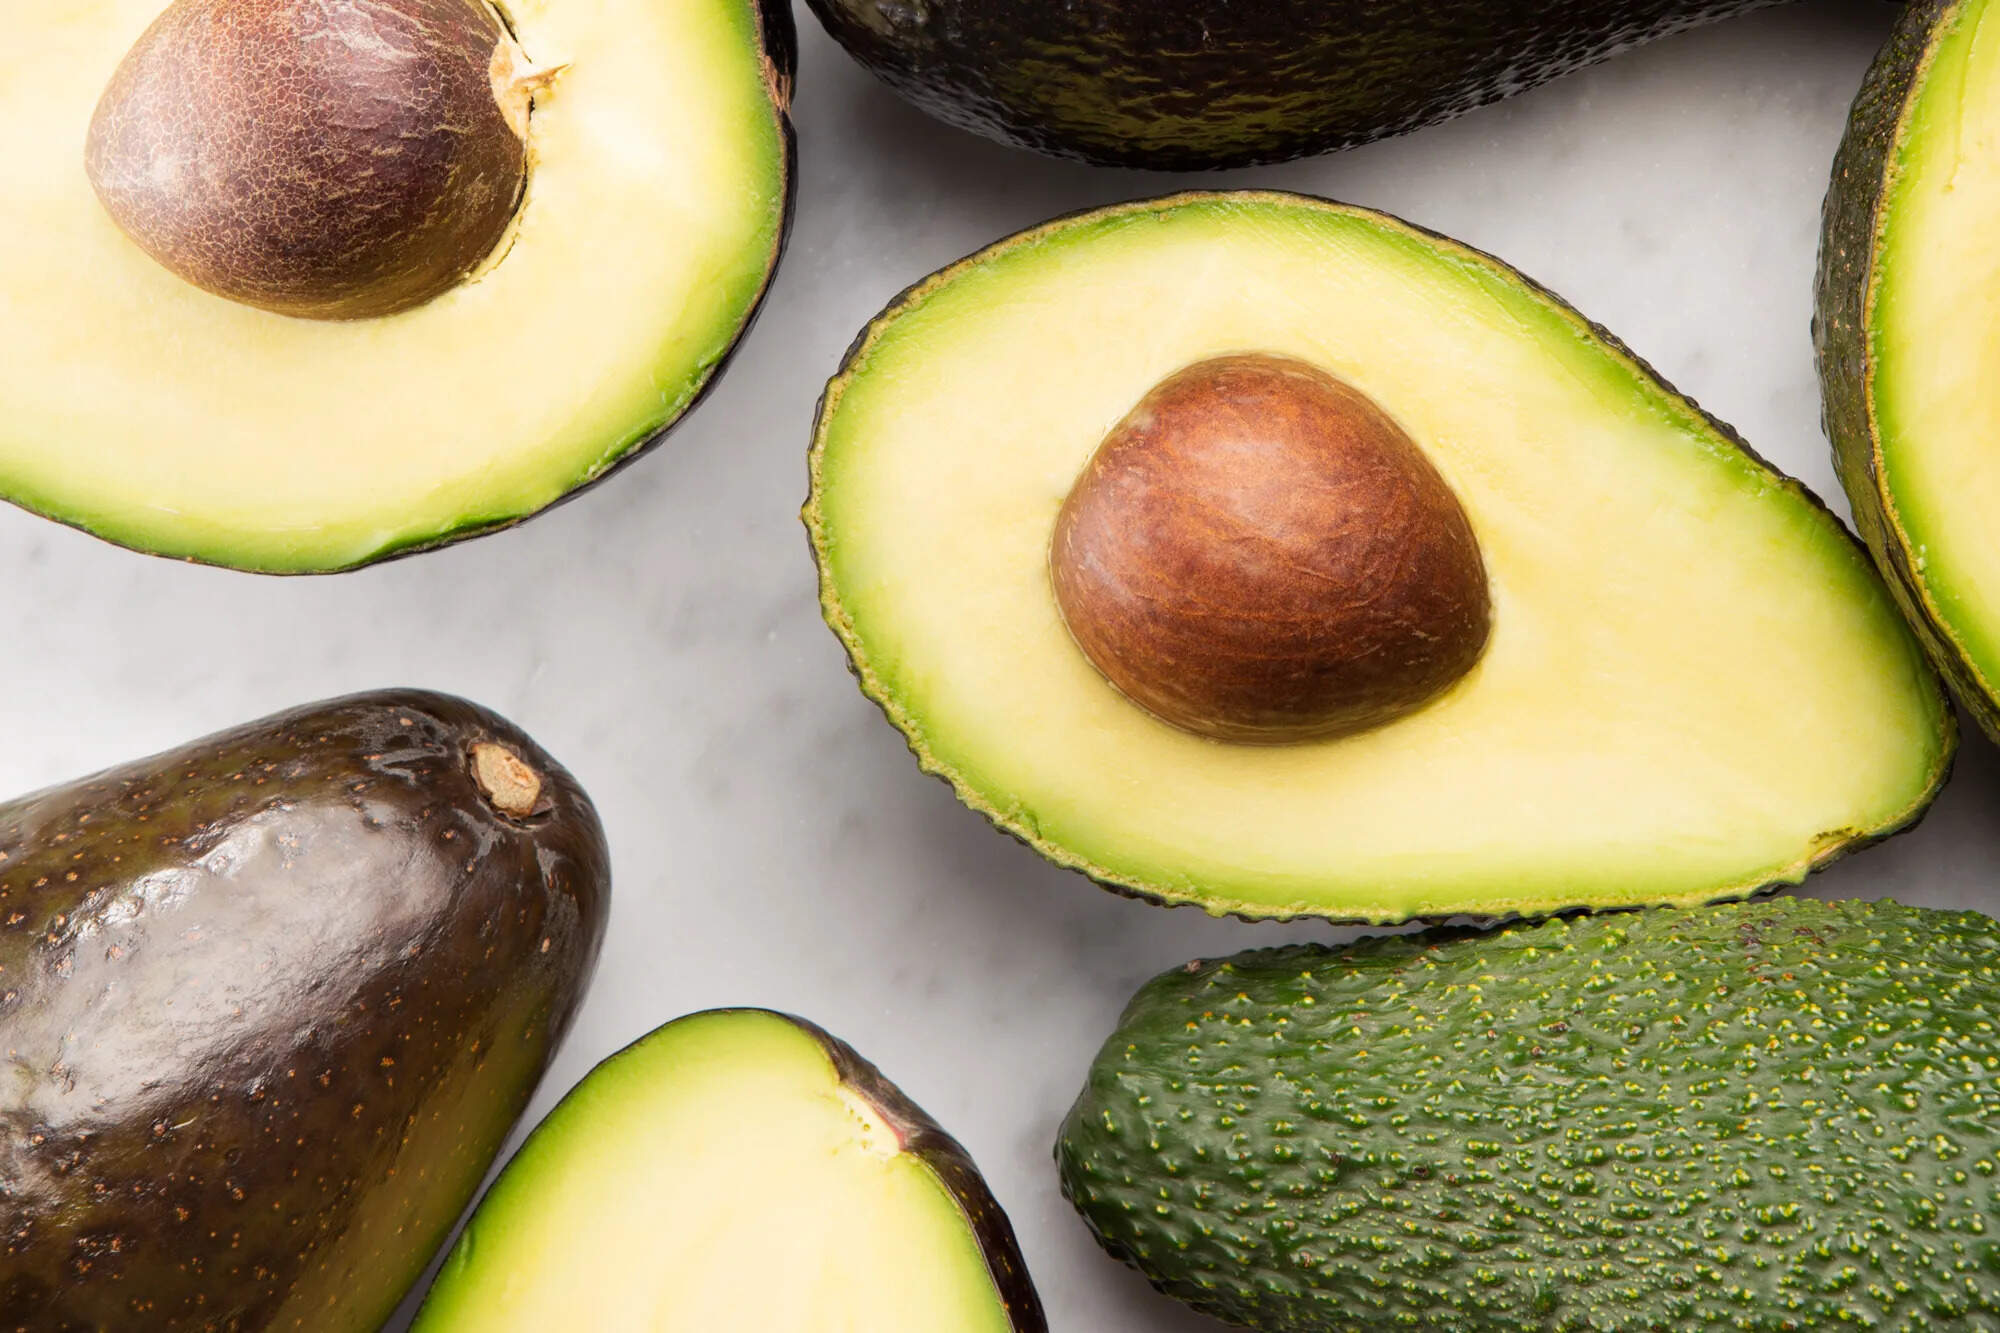 How To Store Cut Avocado In The Fridge